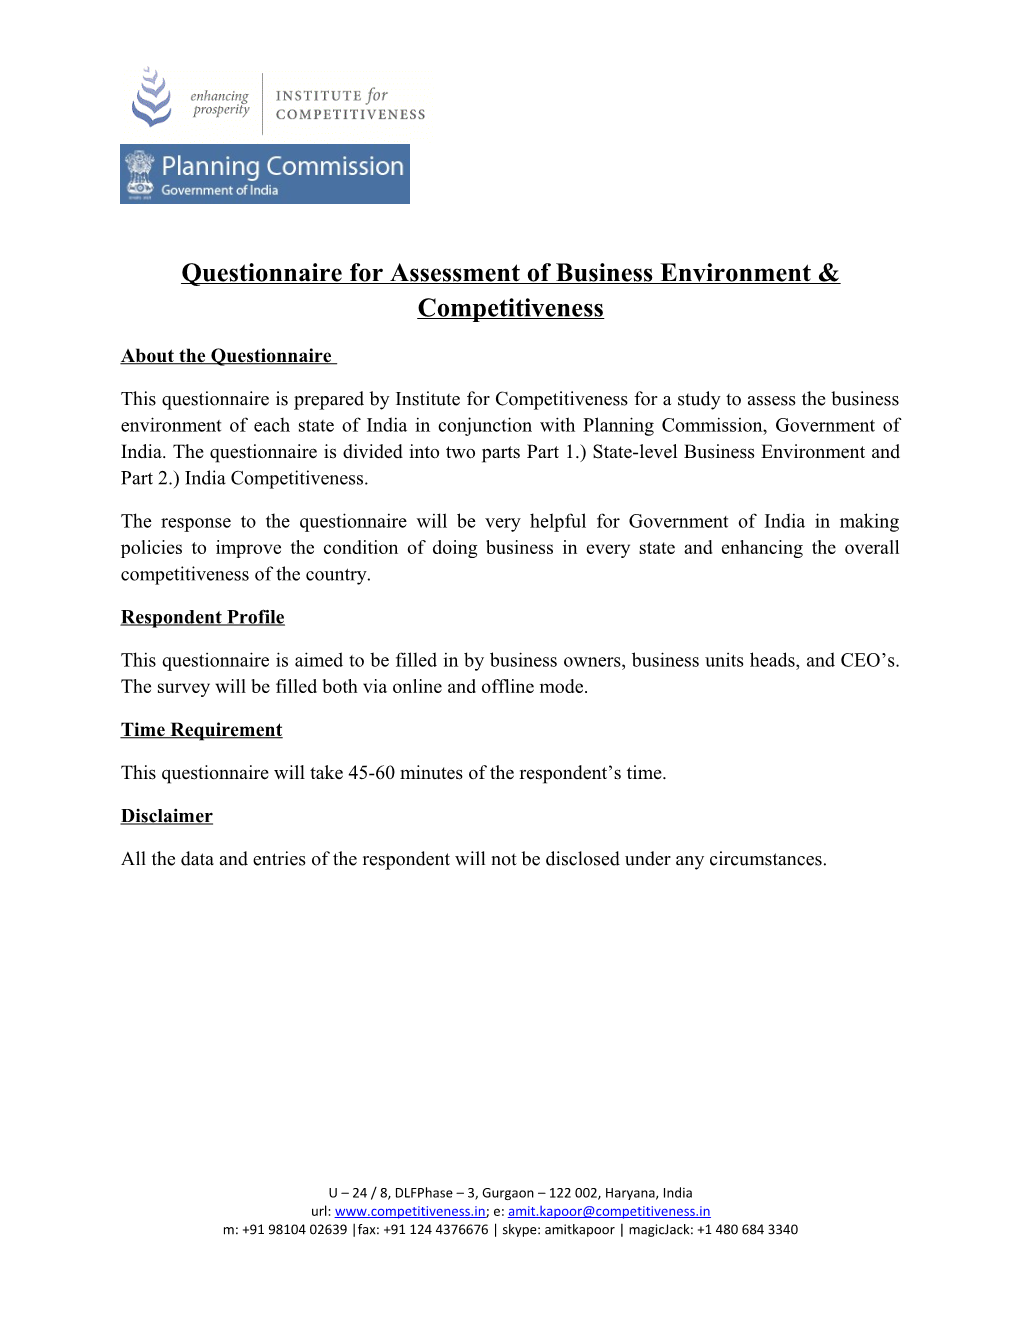 Questionnaire for Assessment of Business Environment & Competitiveness